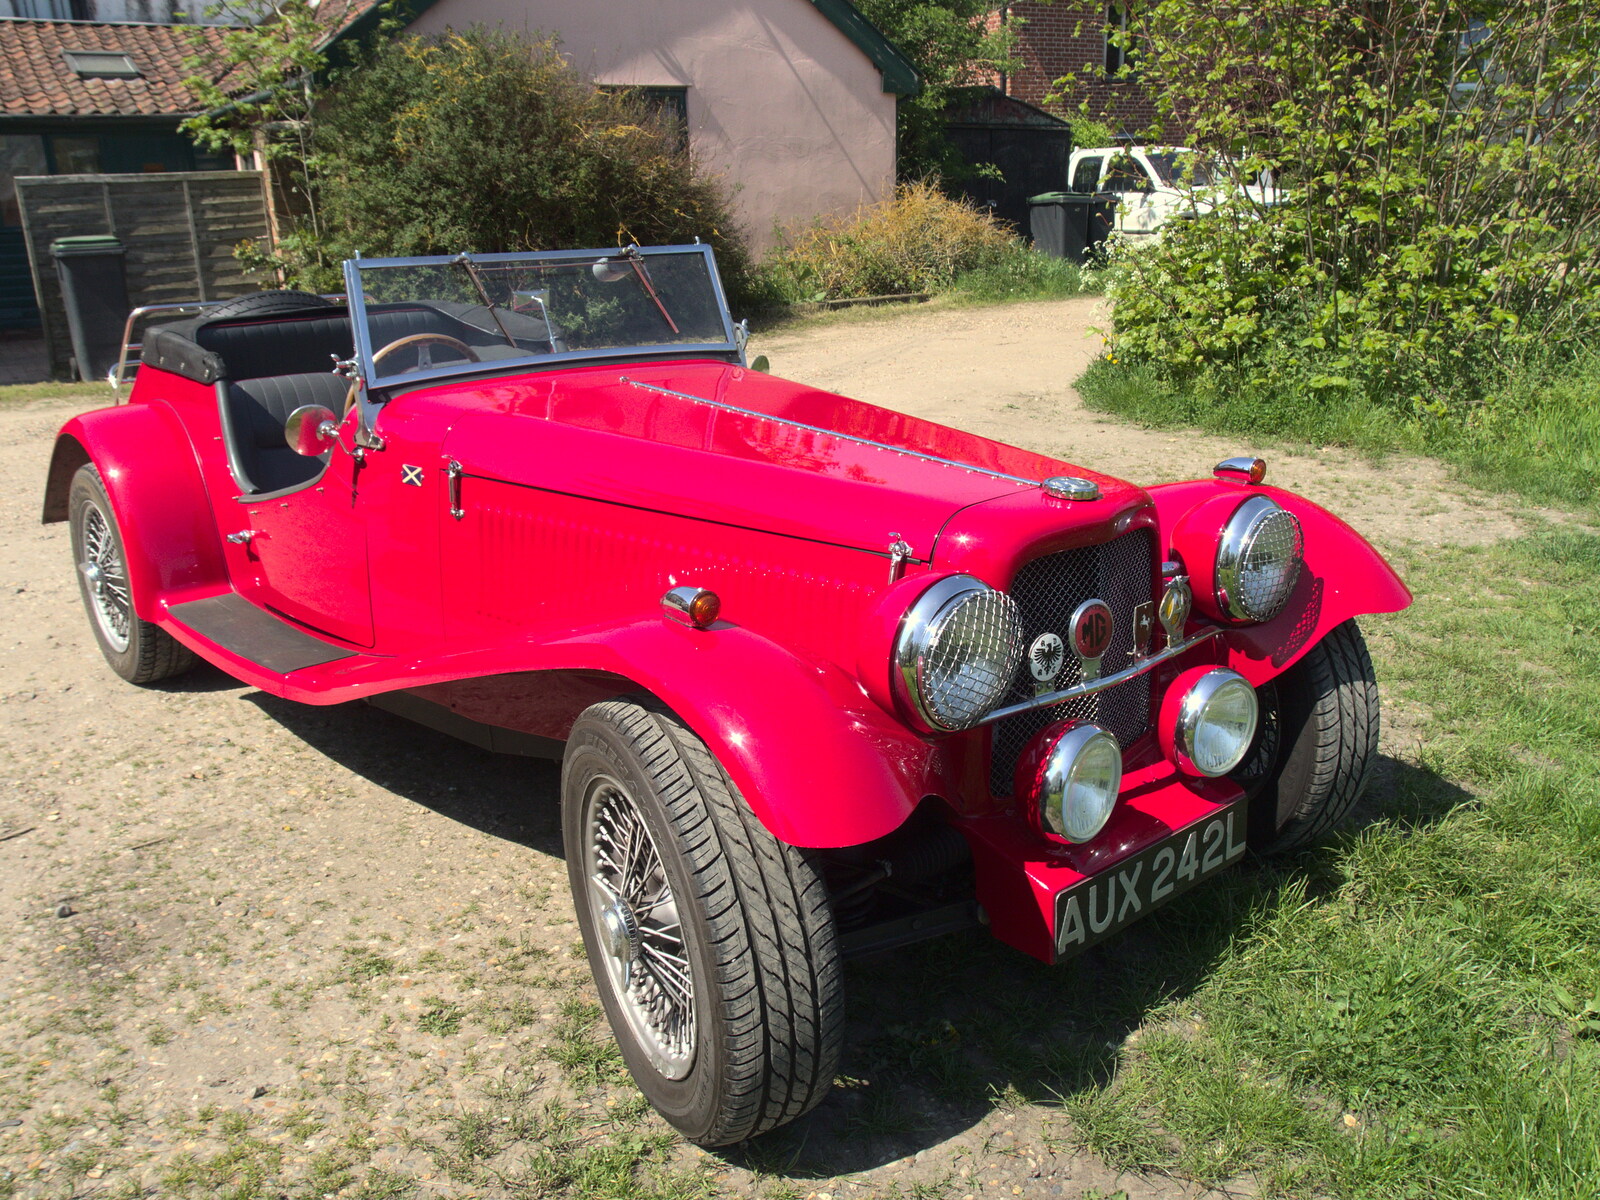 A nice old MG roadster from A Bike Ride to the Railway Tavern, Mellis, Suffolk - 7th May 2018